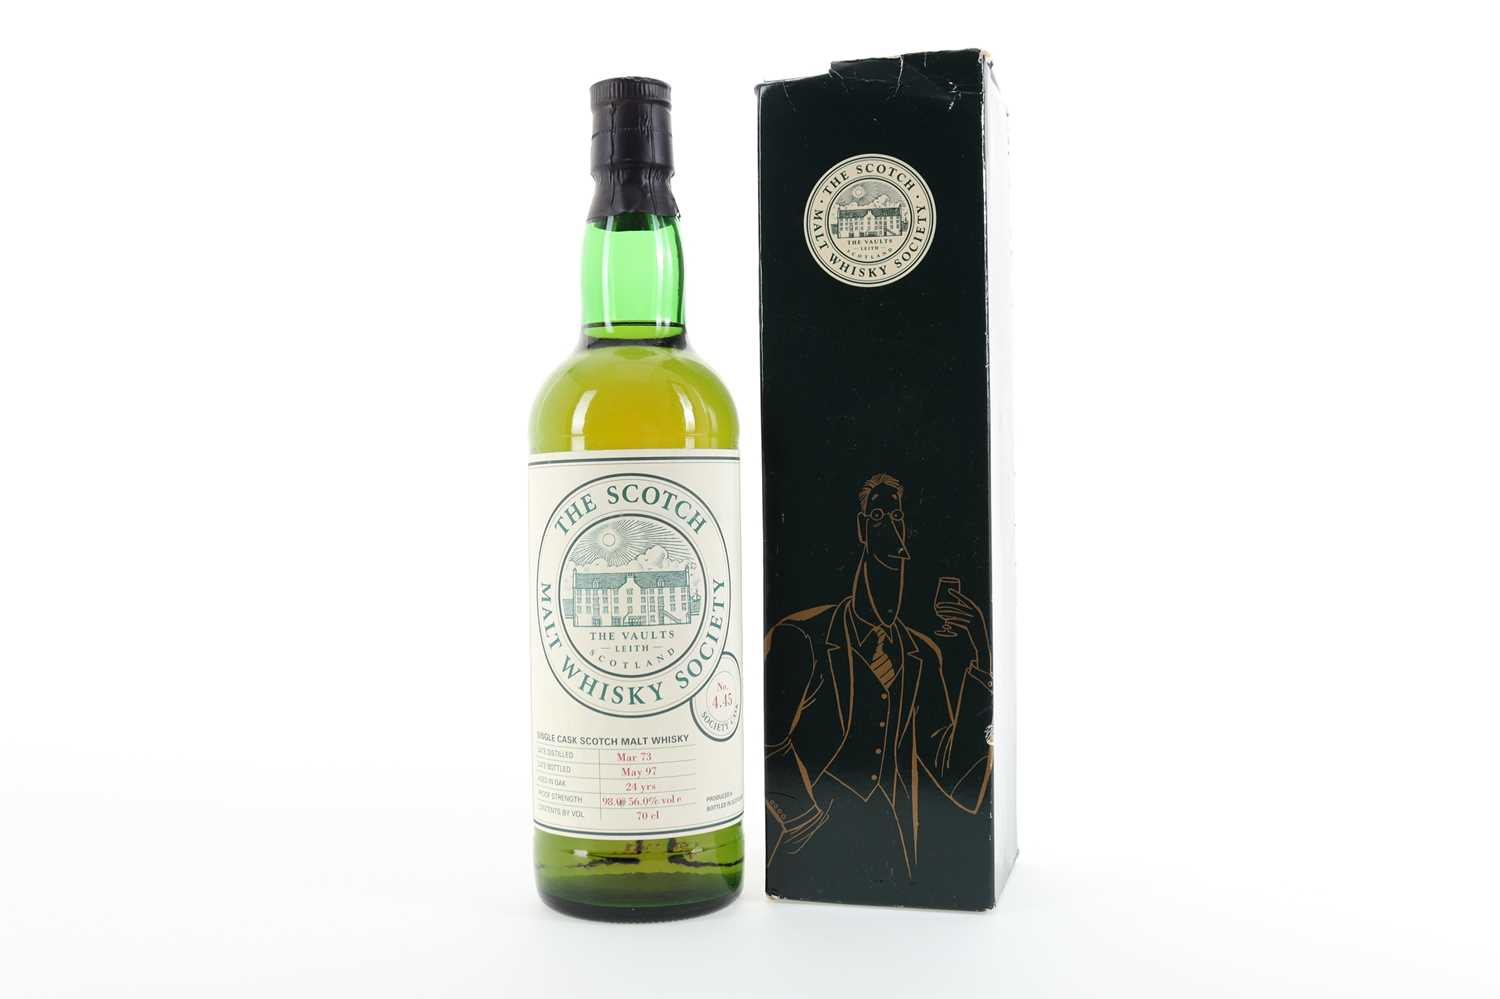 Lot 271 - SMWS 4.45 HIGHLAND PARK 1973 24 YEAR OLD